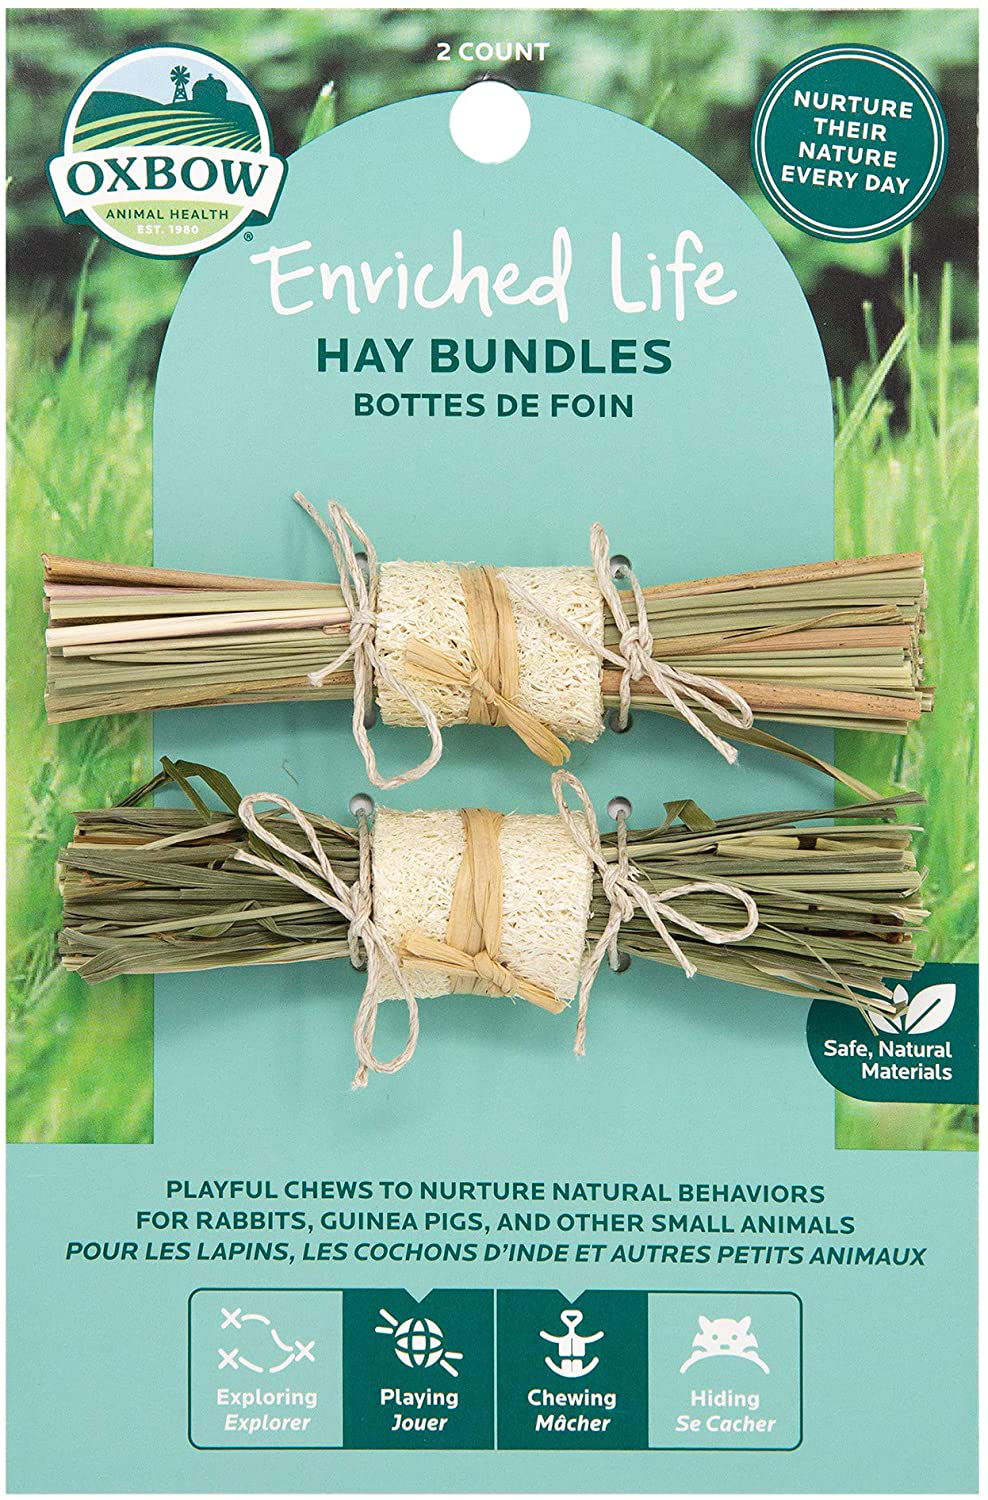 Oxbow Enriched Life Hay Bundles